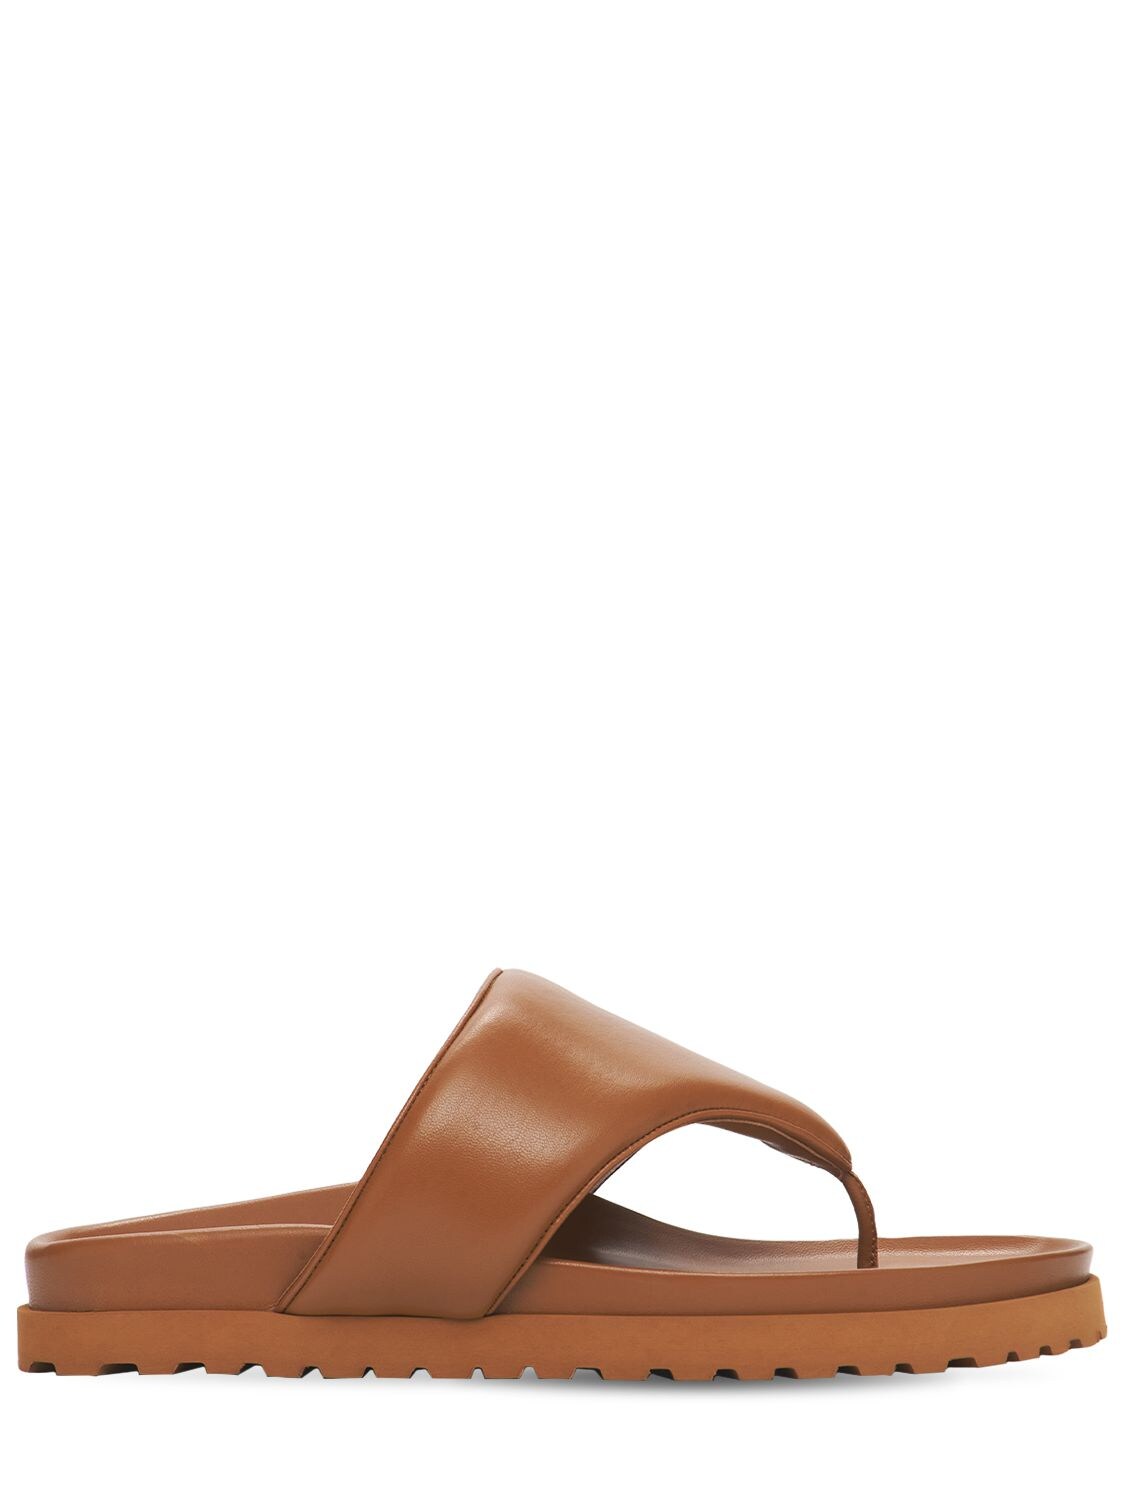 GIA X PERNILLE TEISBAEK 20mm Padded Leather Thong Sandals